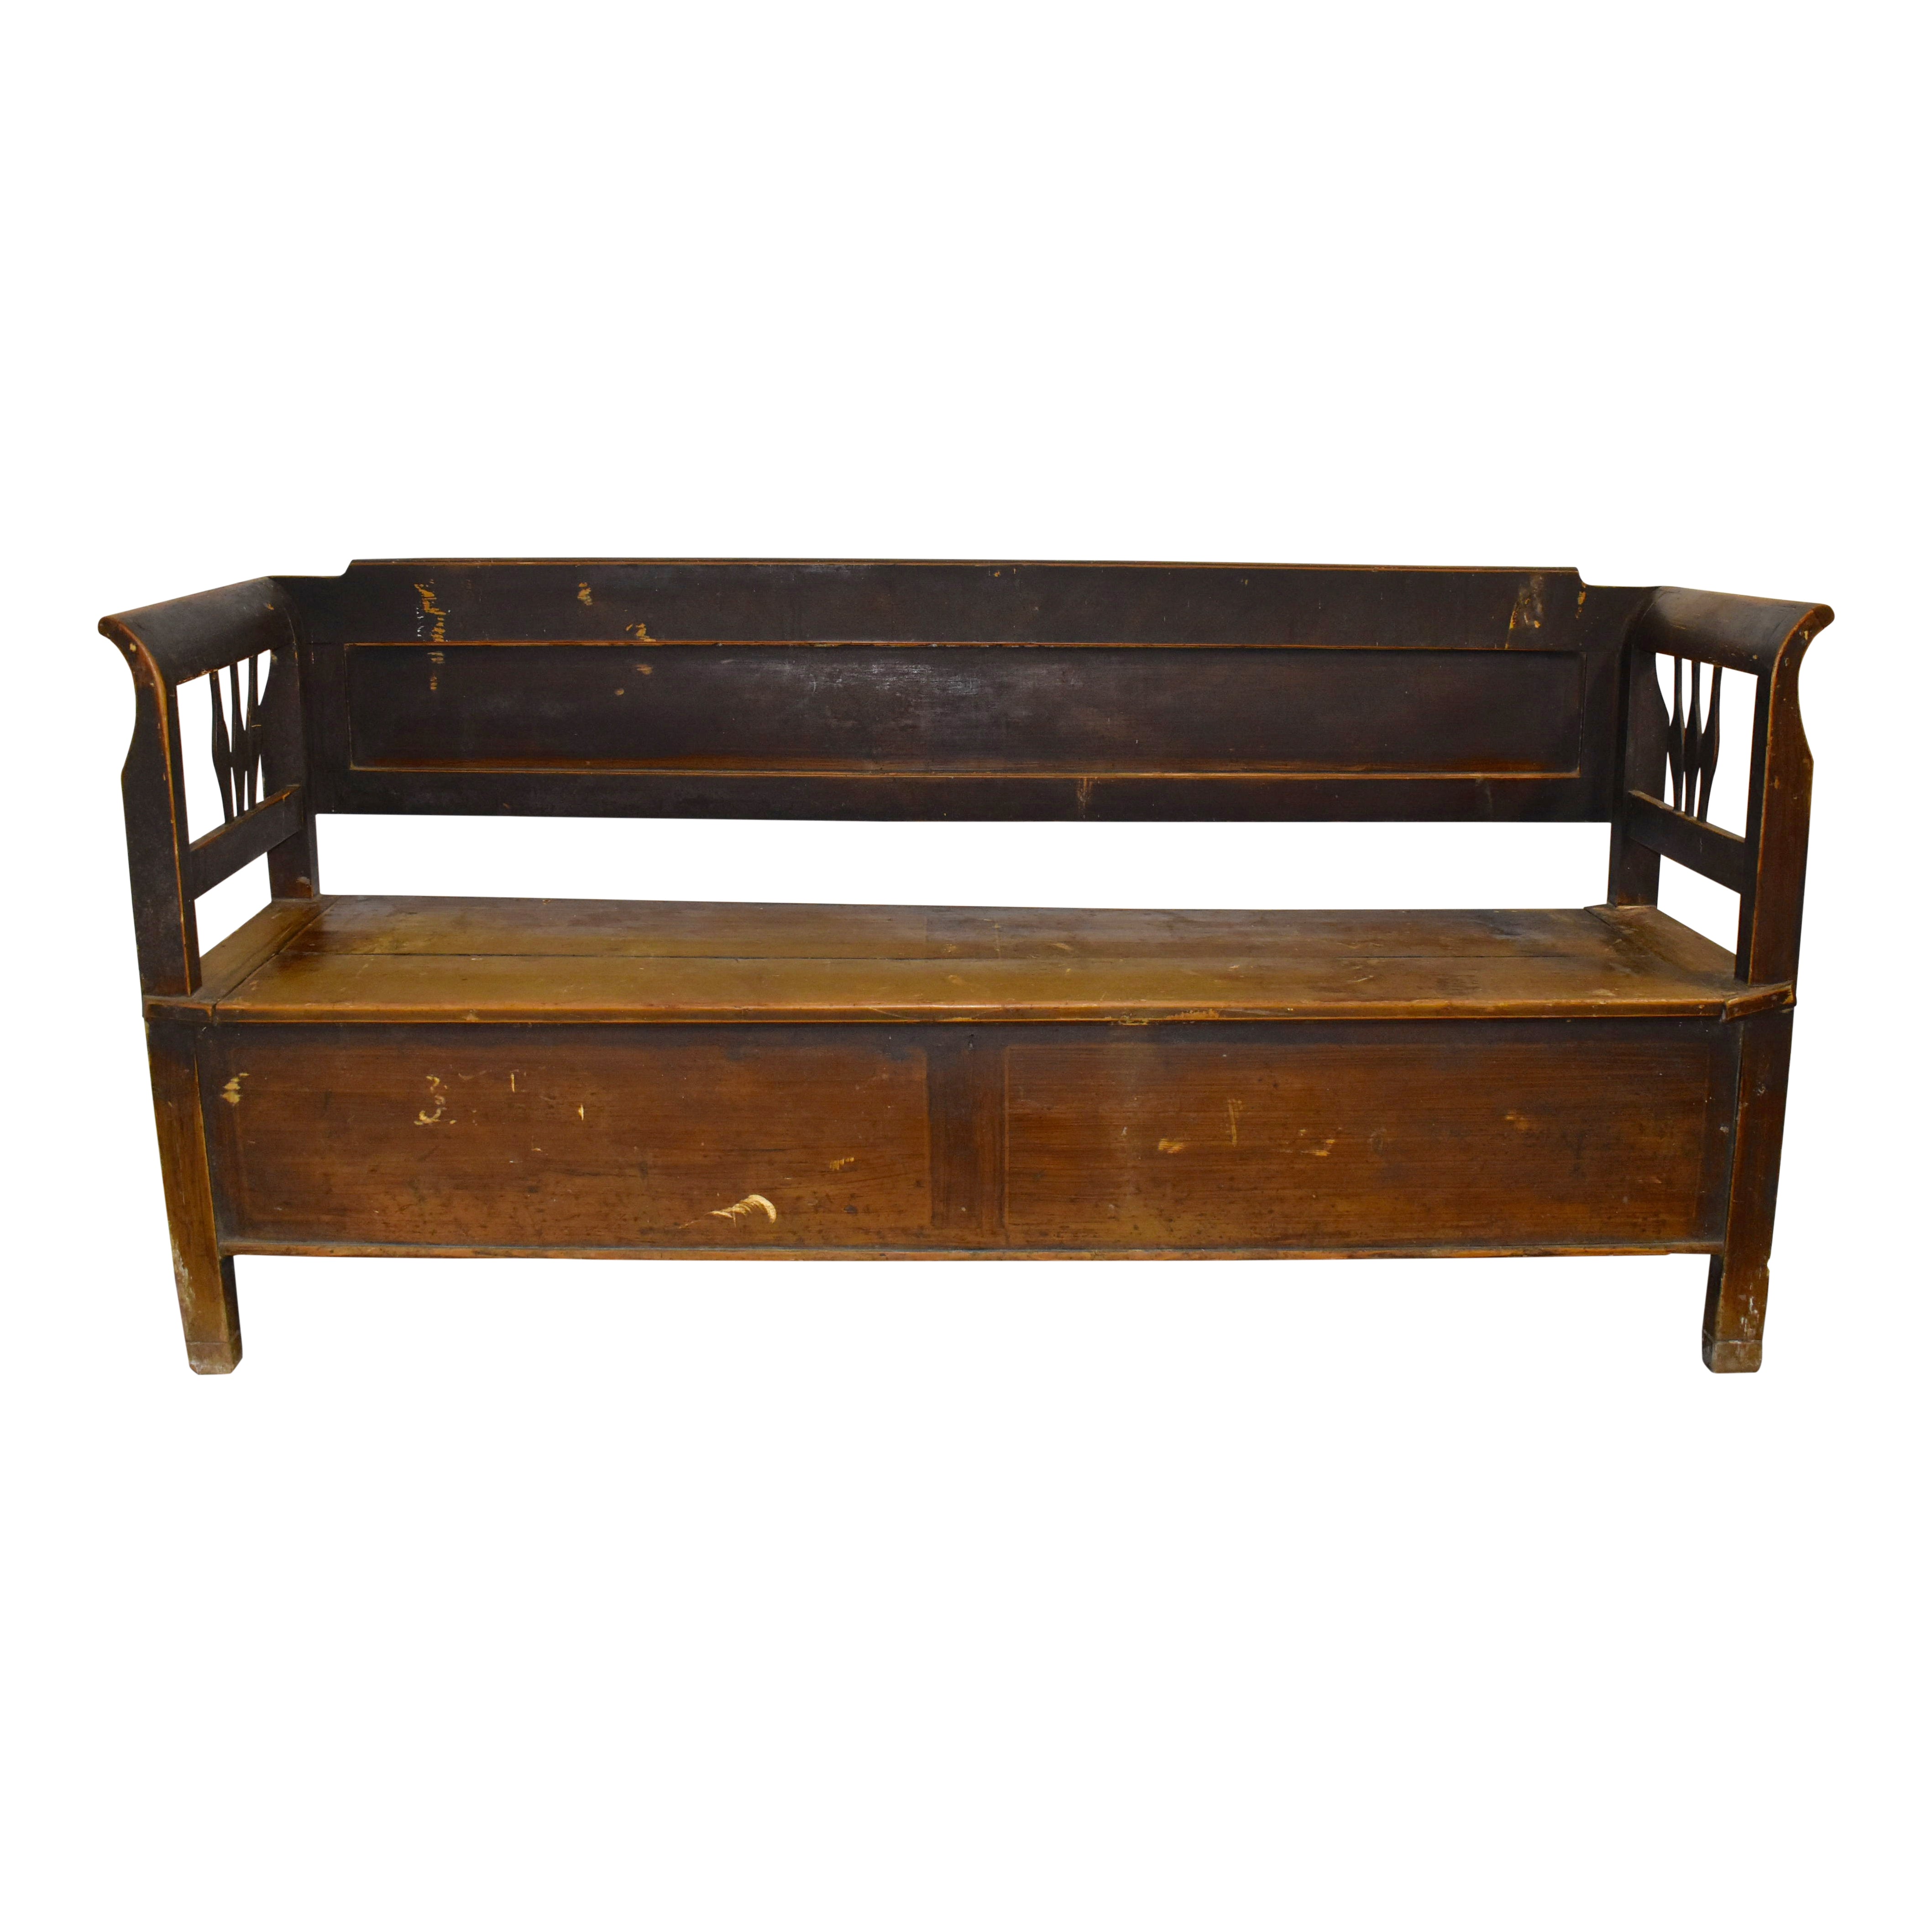 Hungarian Grain Painted Pine Bench with Storage